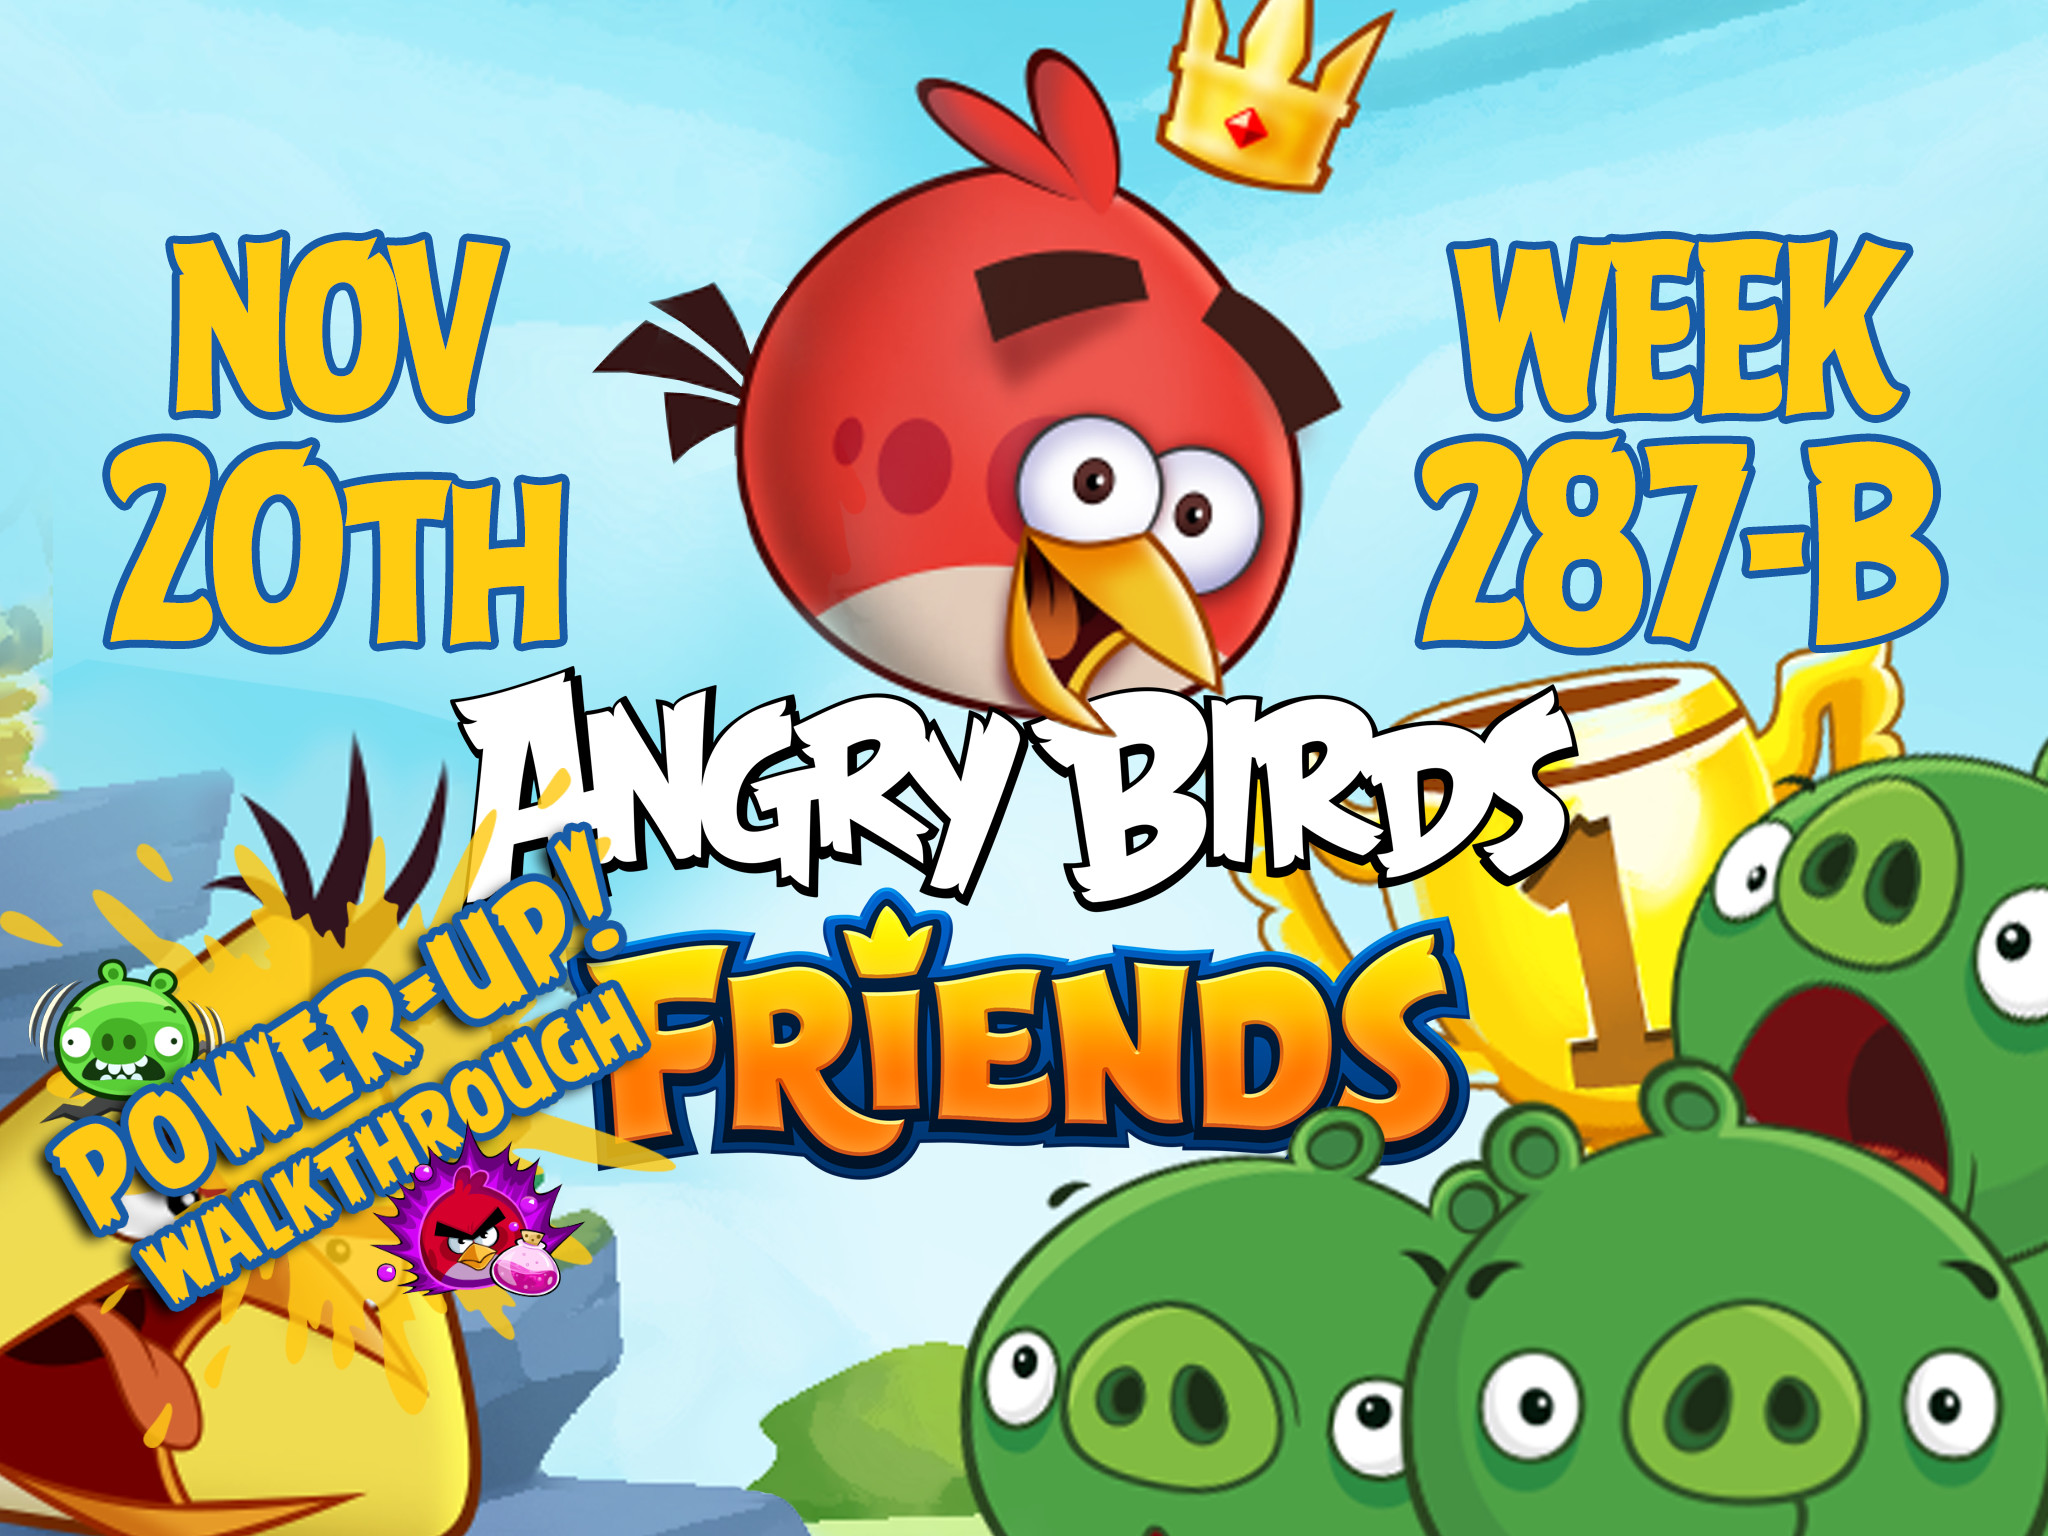 Angry Birds Friends Tournament Week 287-B Feature Image PU